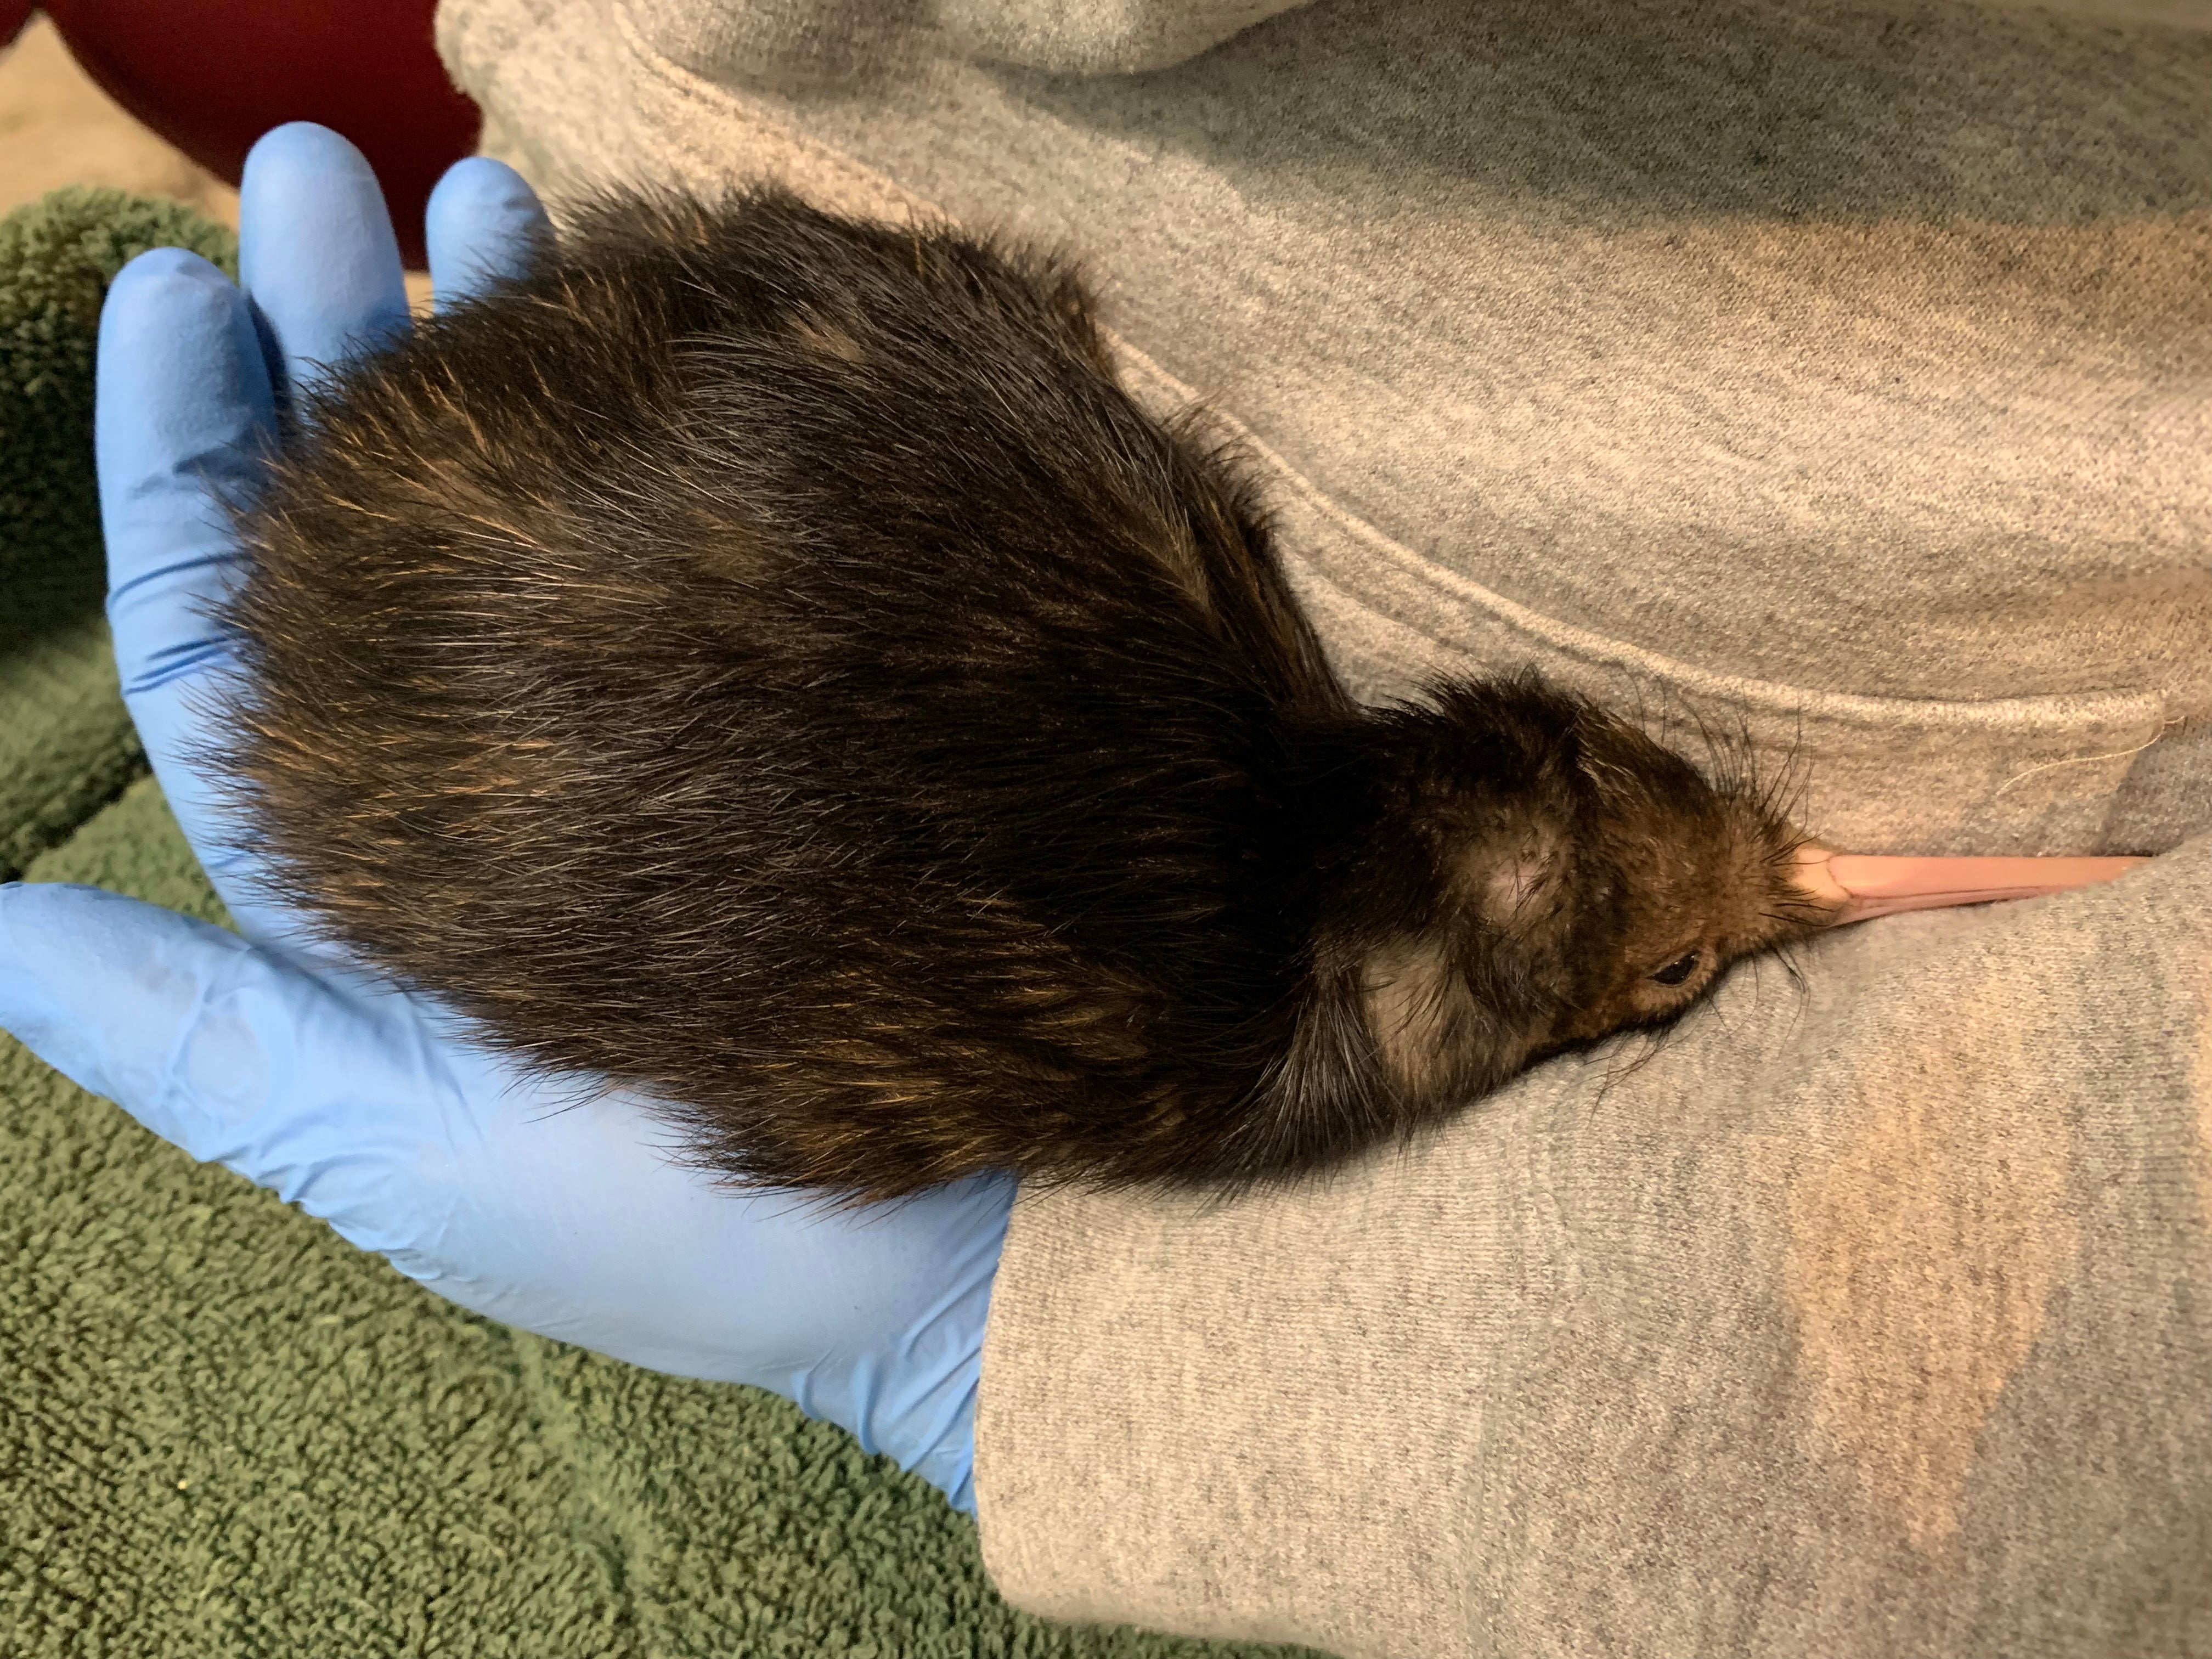 A kiwi chick in a keeper's hand